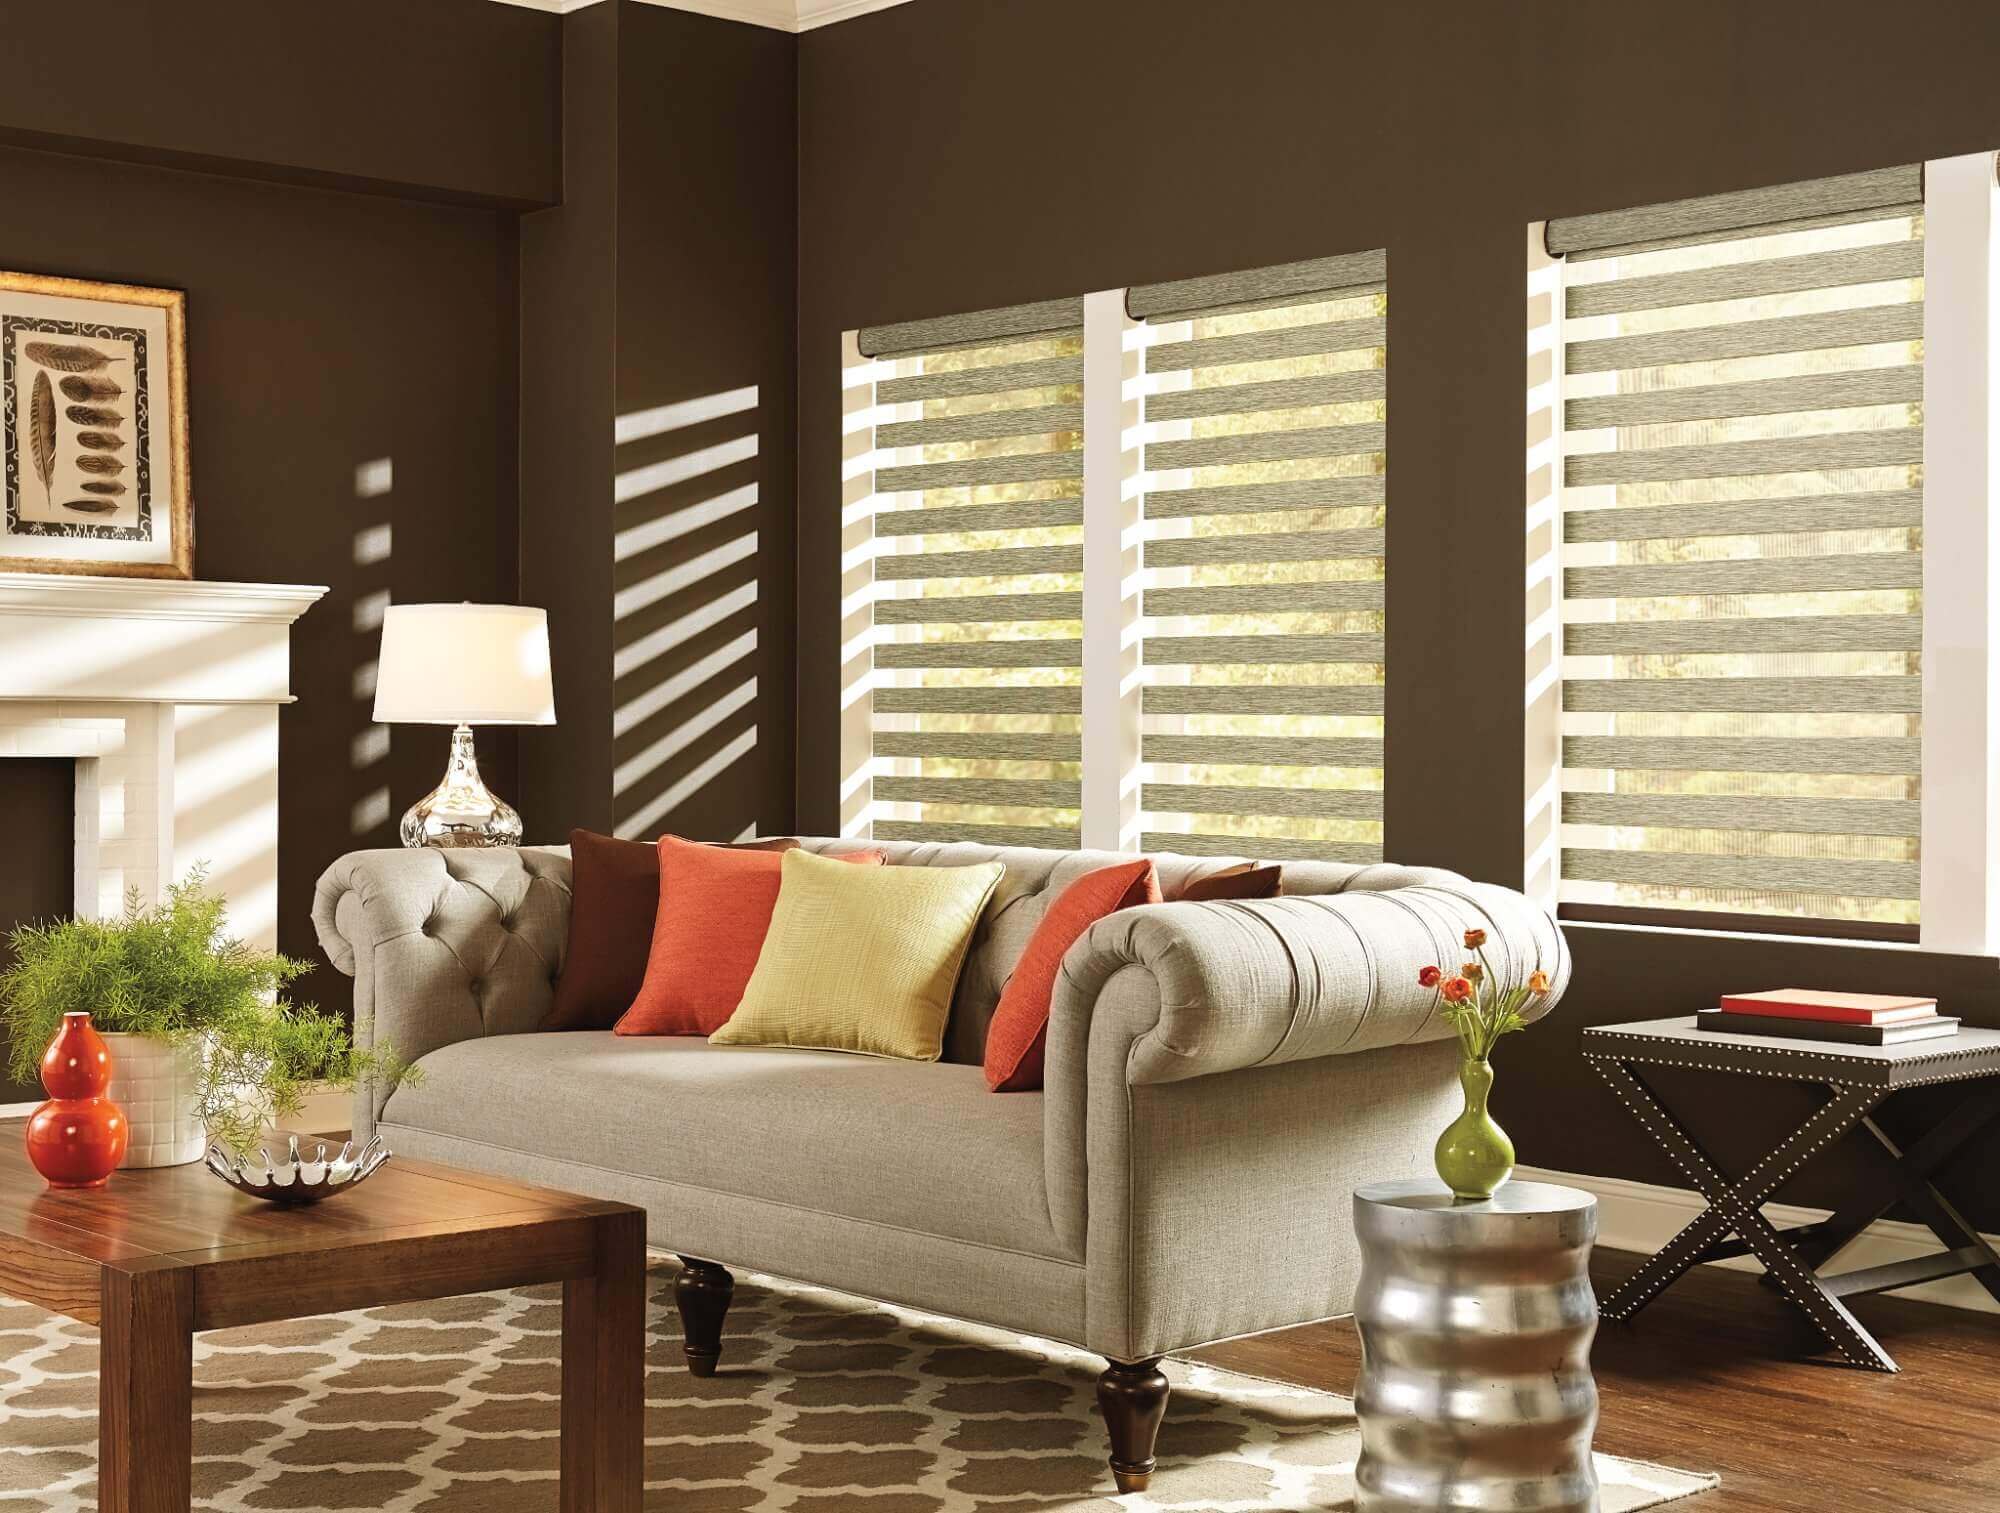 Layered shades have pieces of fabric that alternated between light filtering and solid opacities and are beautiful window treatments for light control.